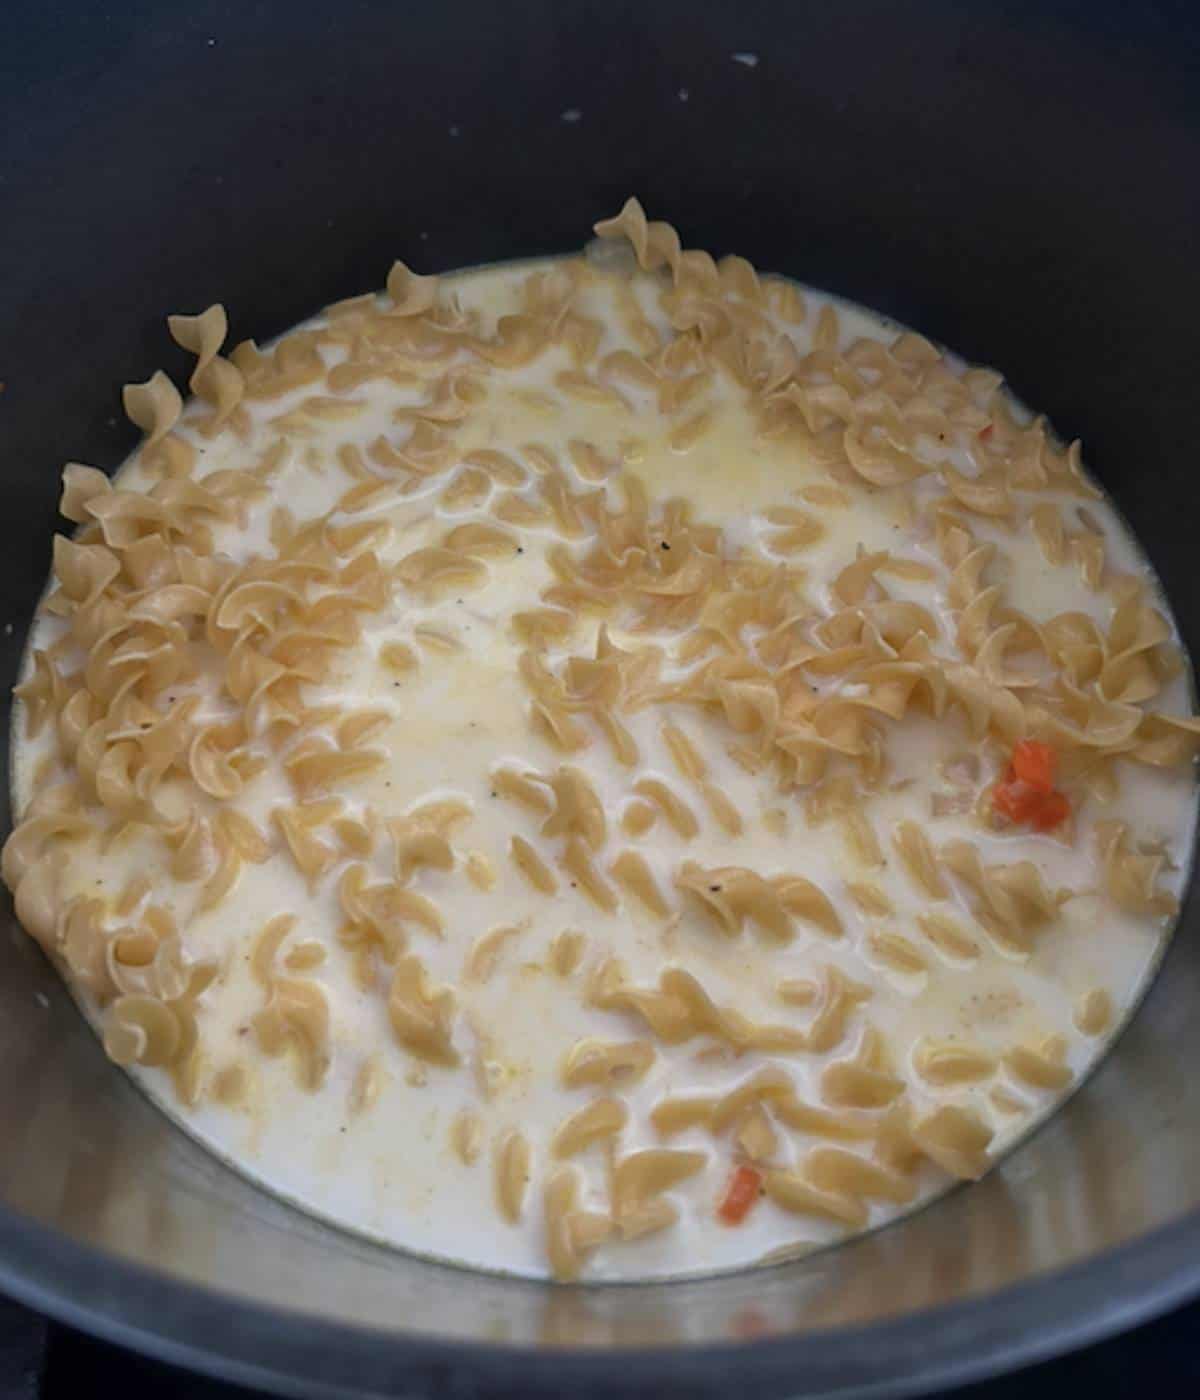 Cream and chicken stock with noodles in pot.